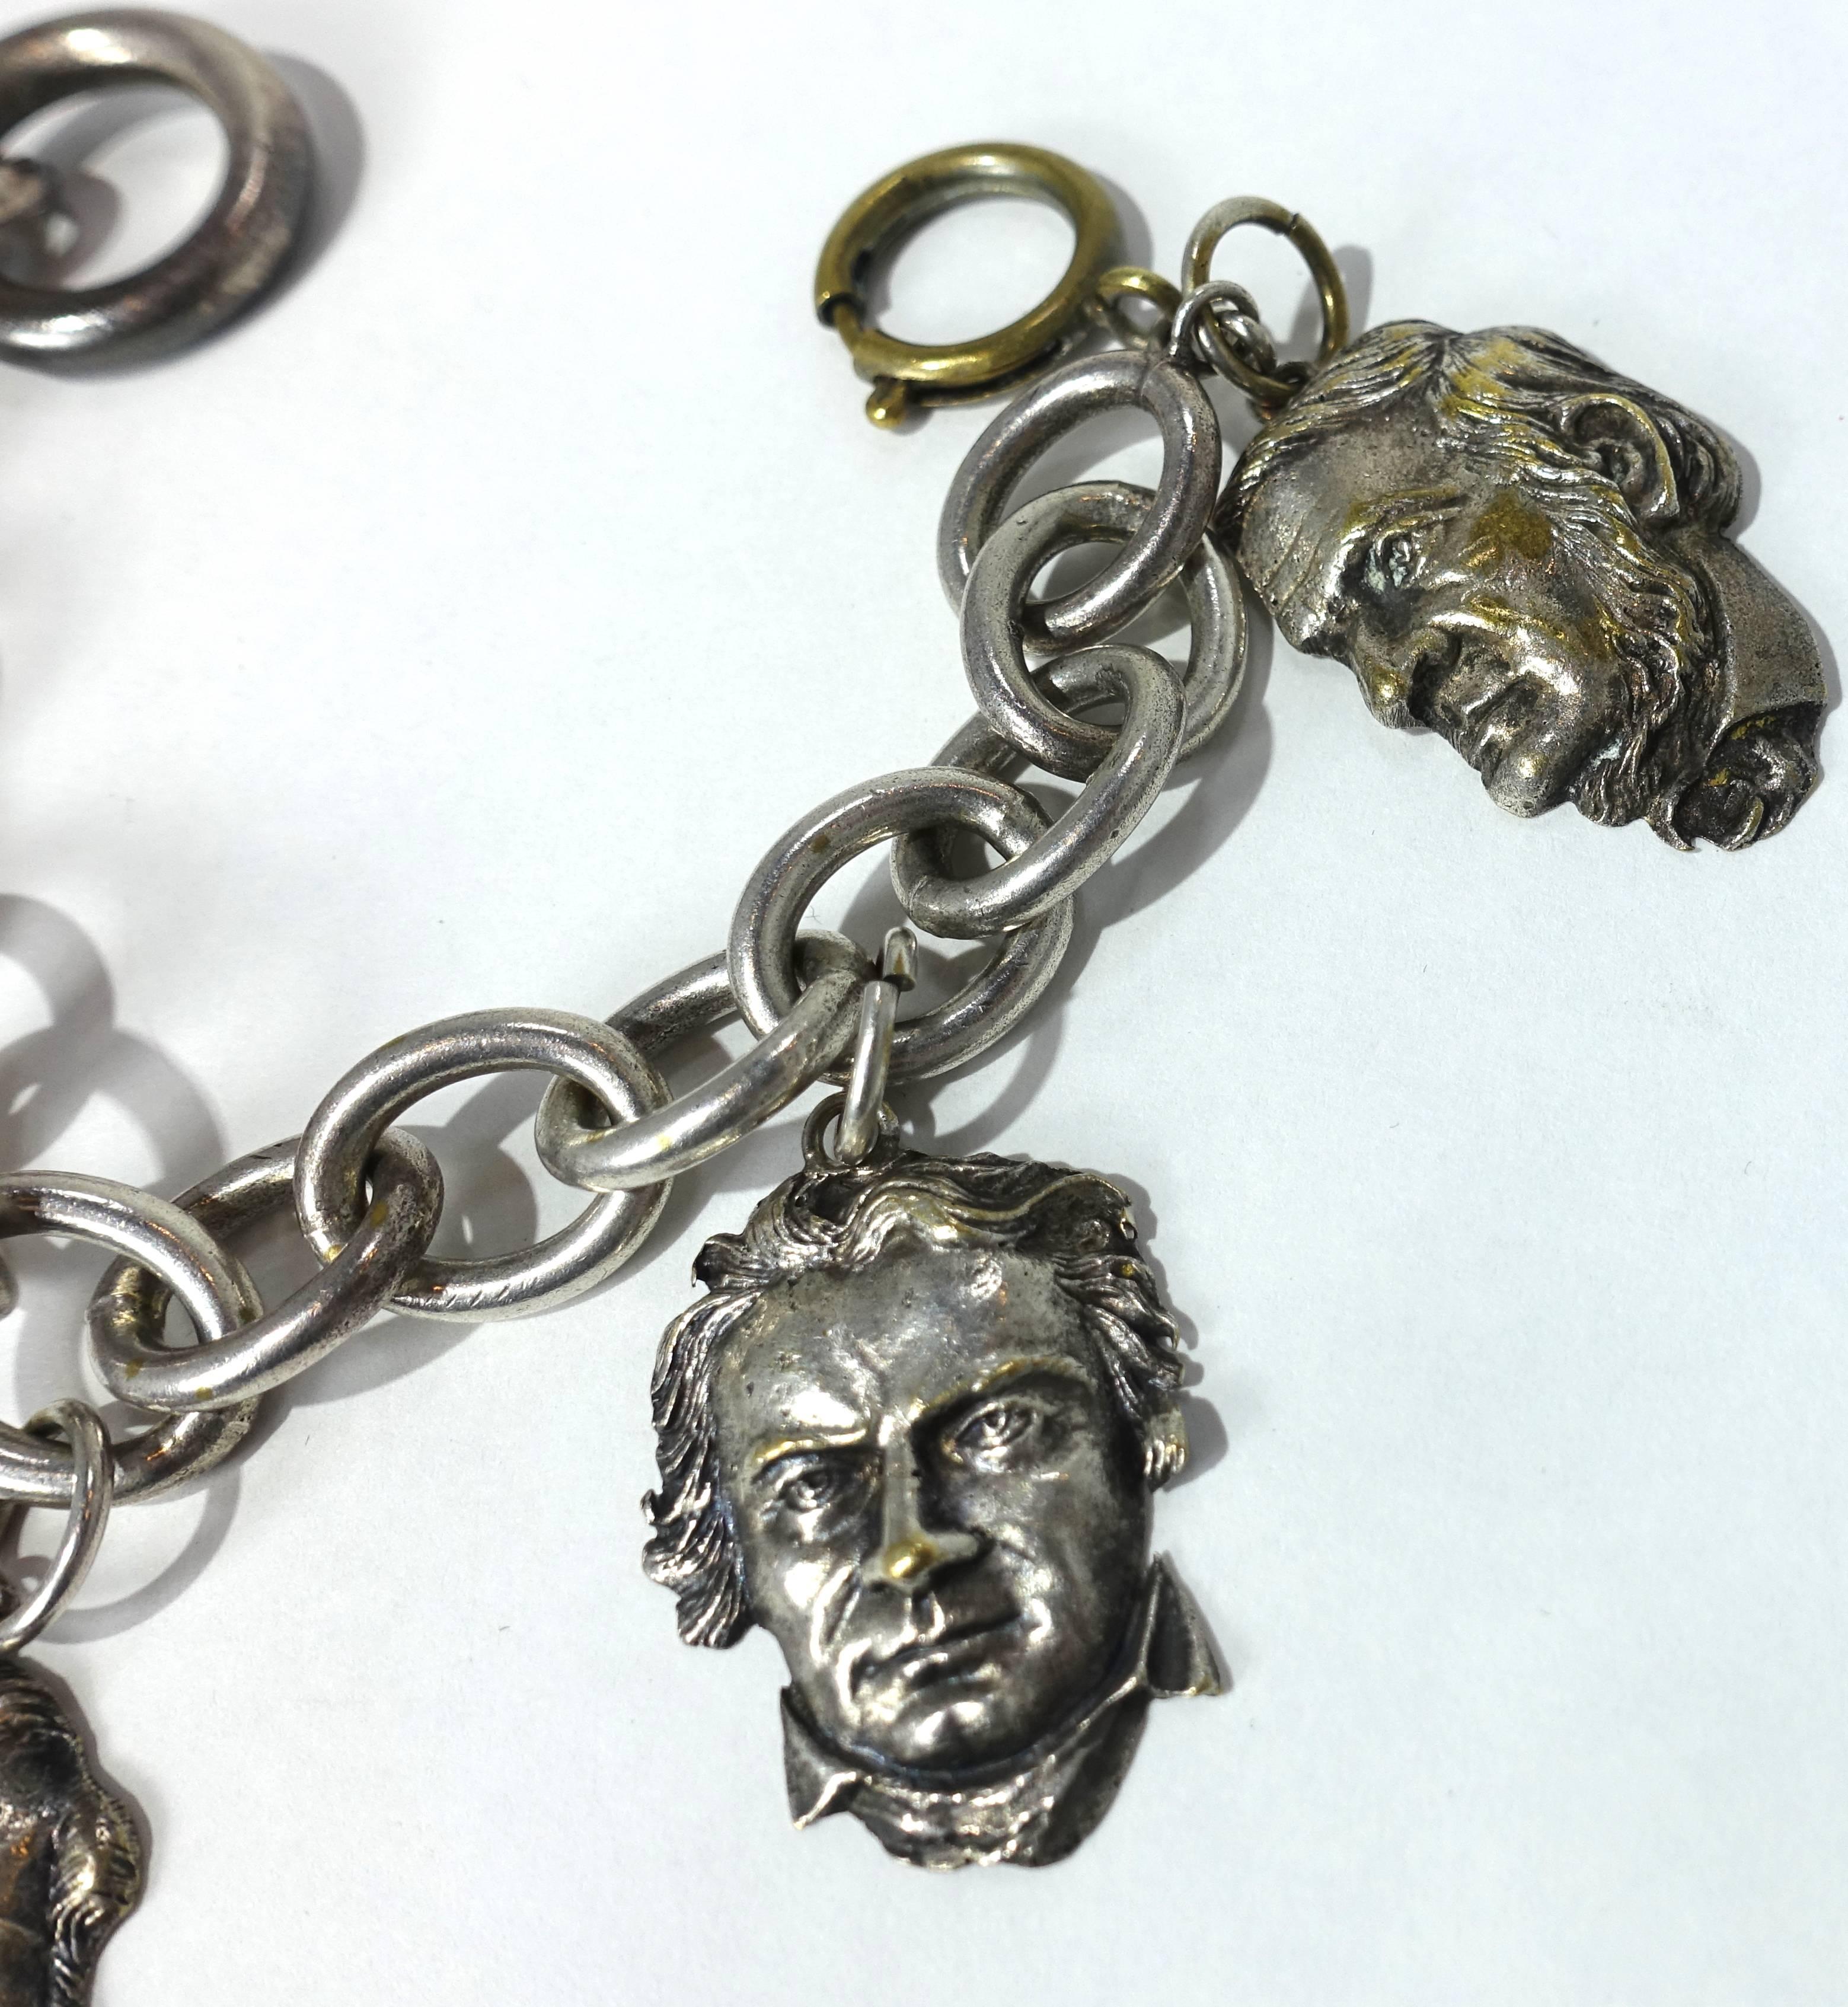 Classical music lovers must see this. This vintage bracelet features 5 charms each with an image of the classical composers on one side and his name and birth/death dates on the other.  Composers are Mozart, Bellini, Beethoven, Gounod and Wagner. 